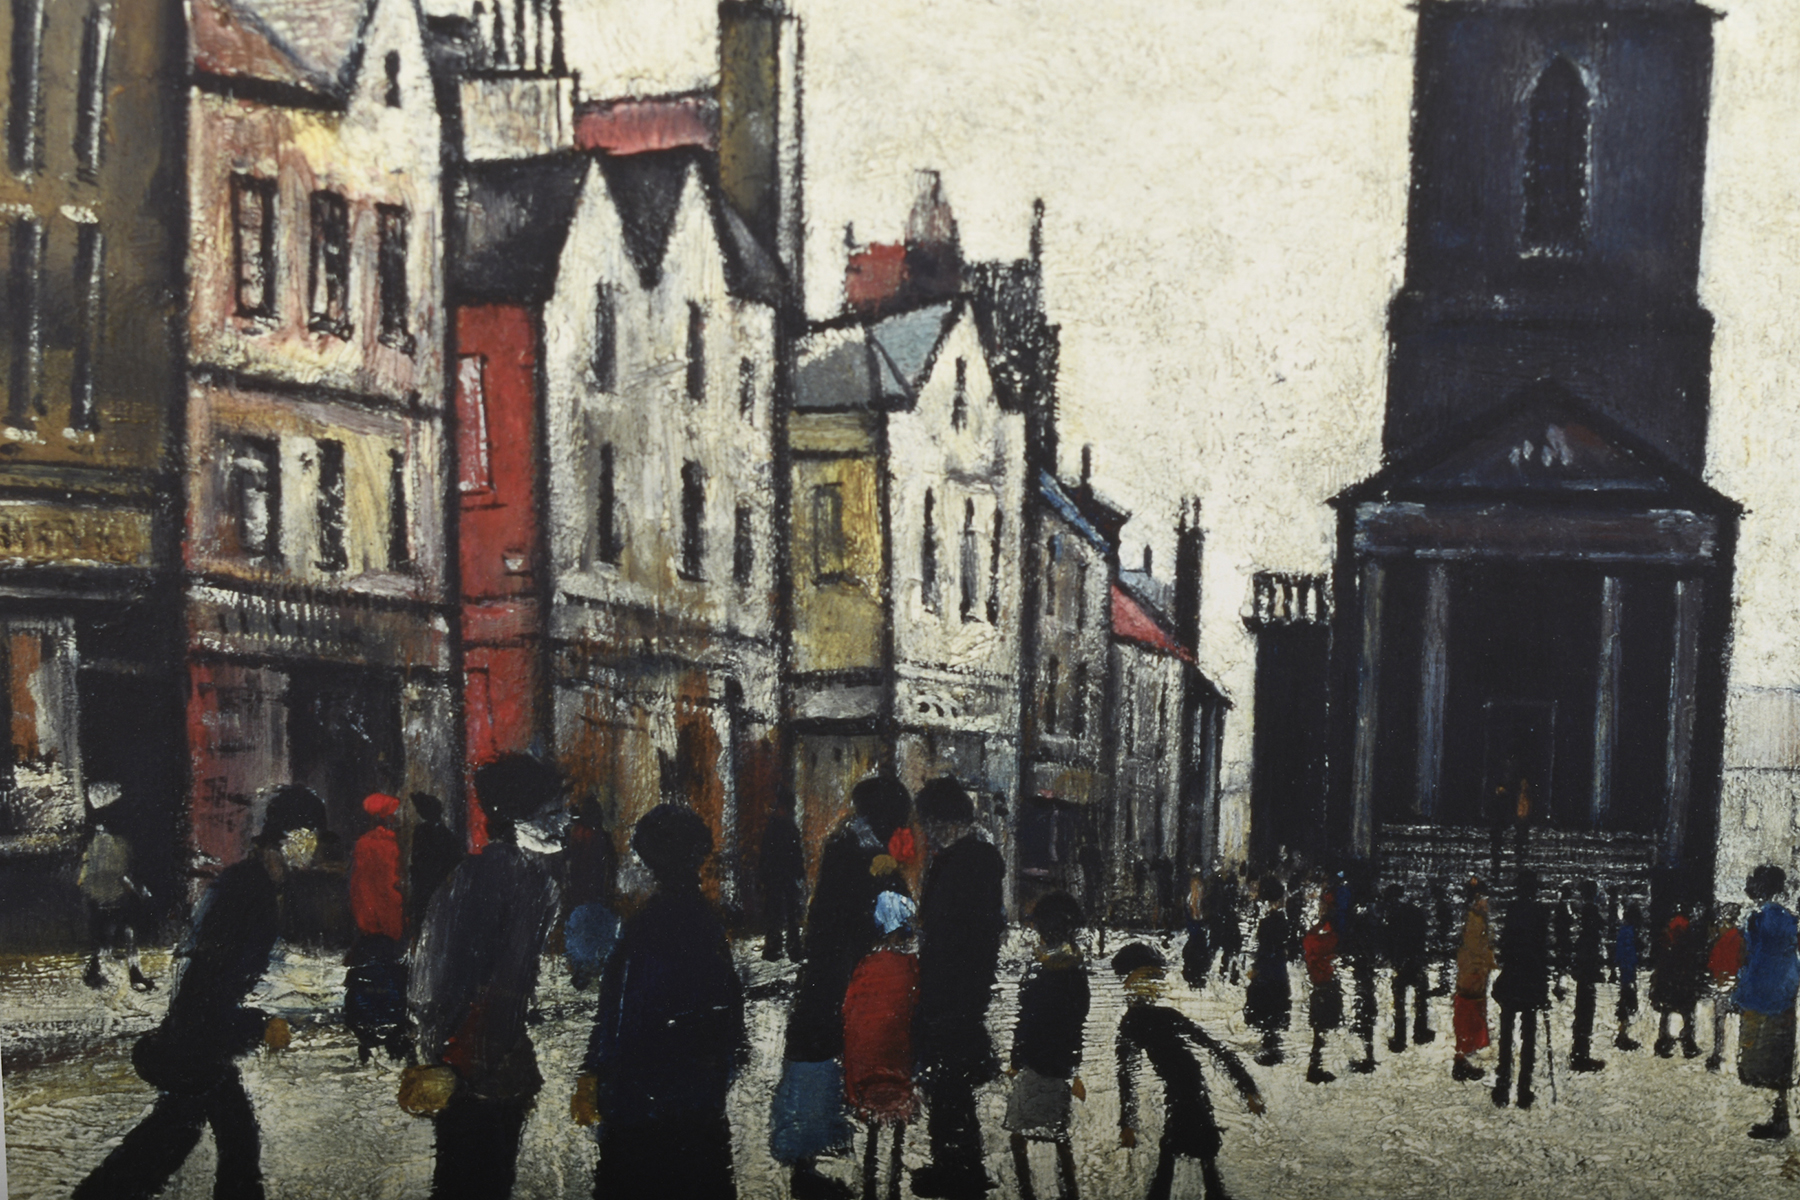 Limited Edition by L.S. Lowry - Image 6 of 10